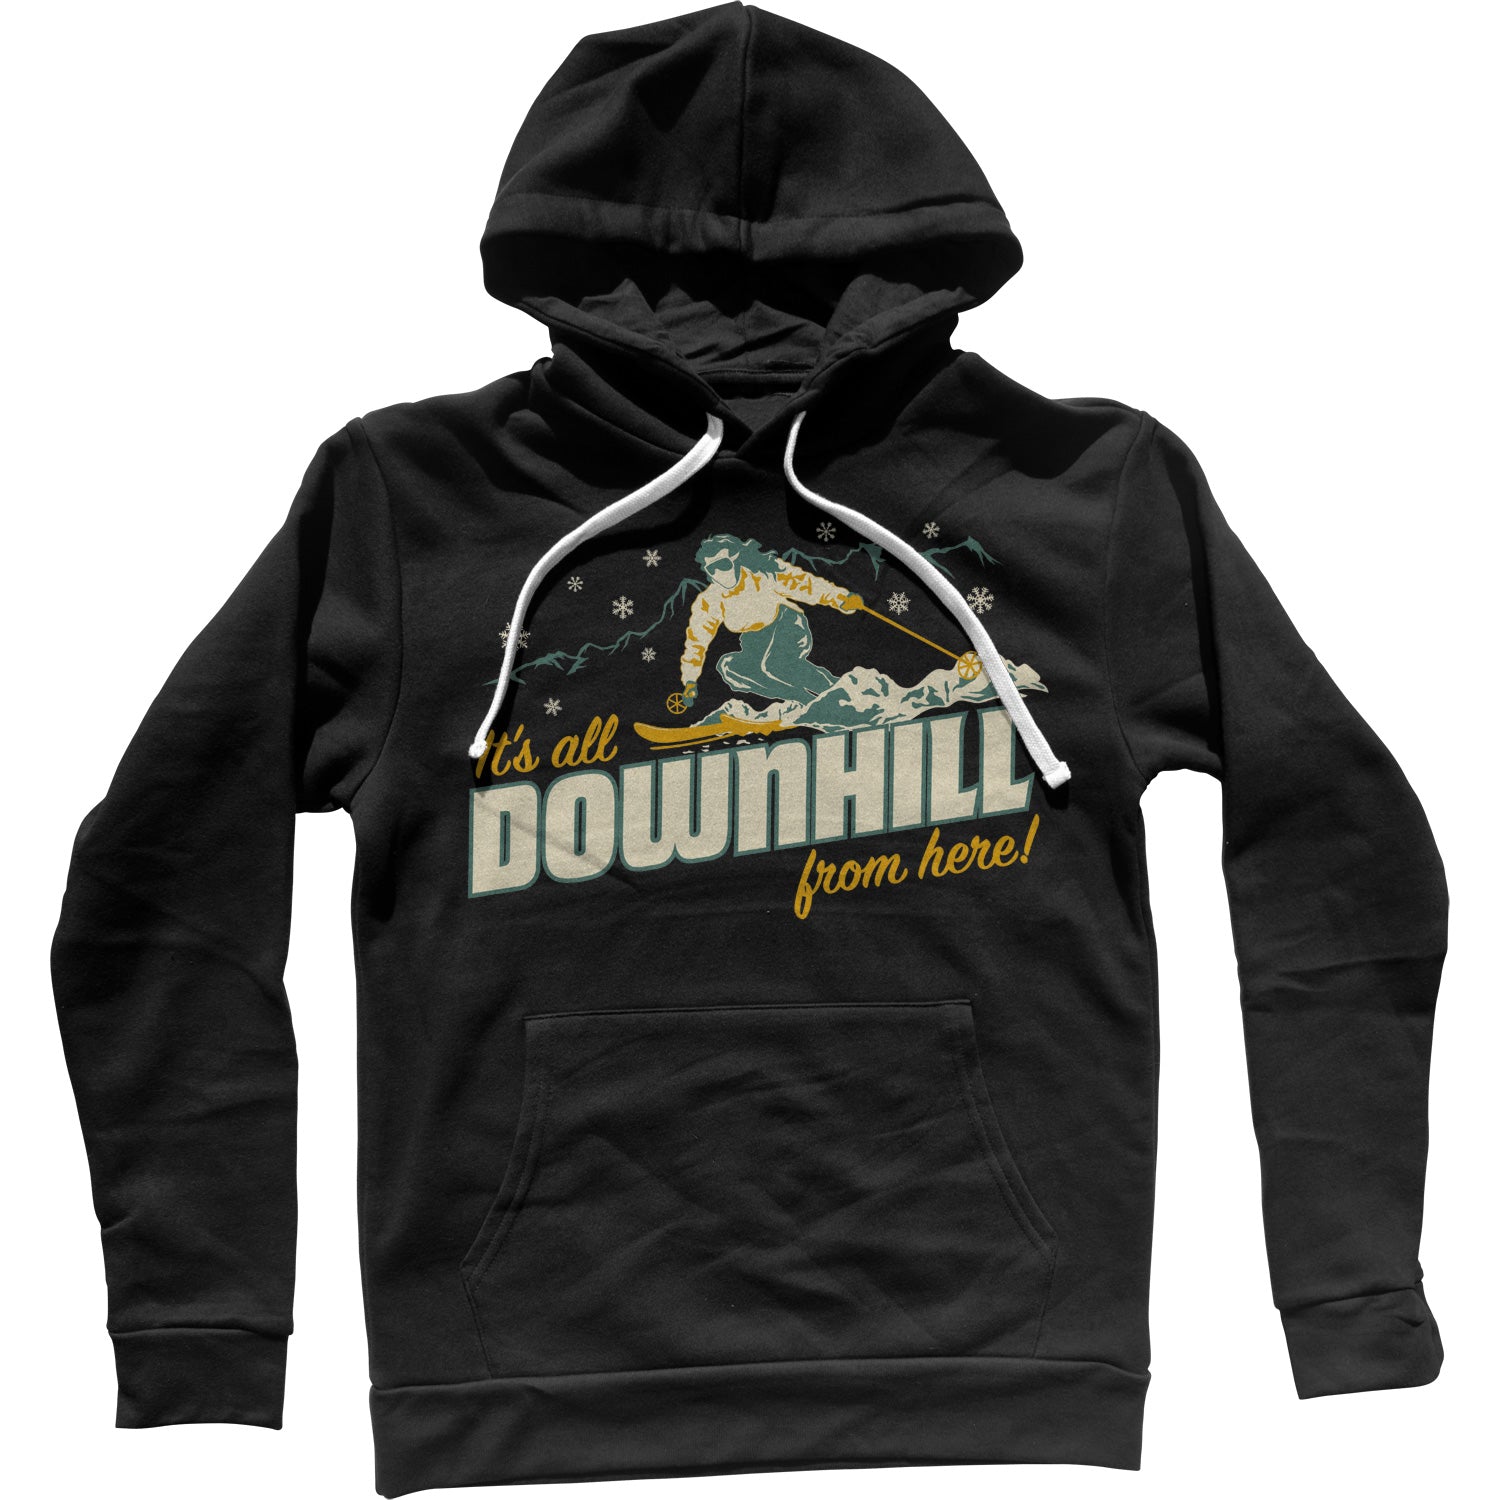 It's All Downhill From Here Unisex Hoodie